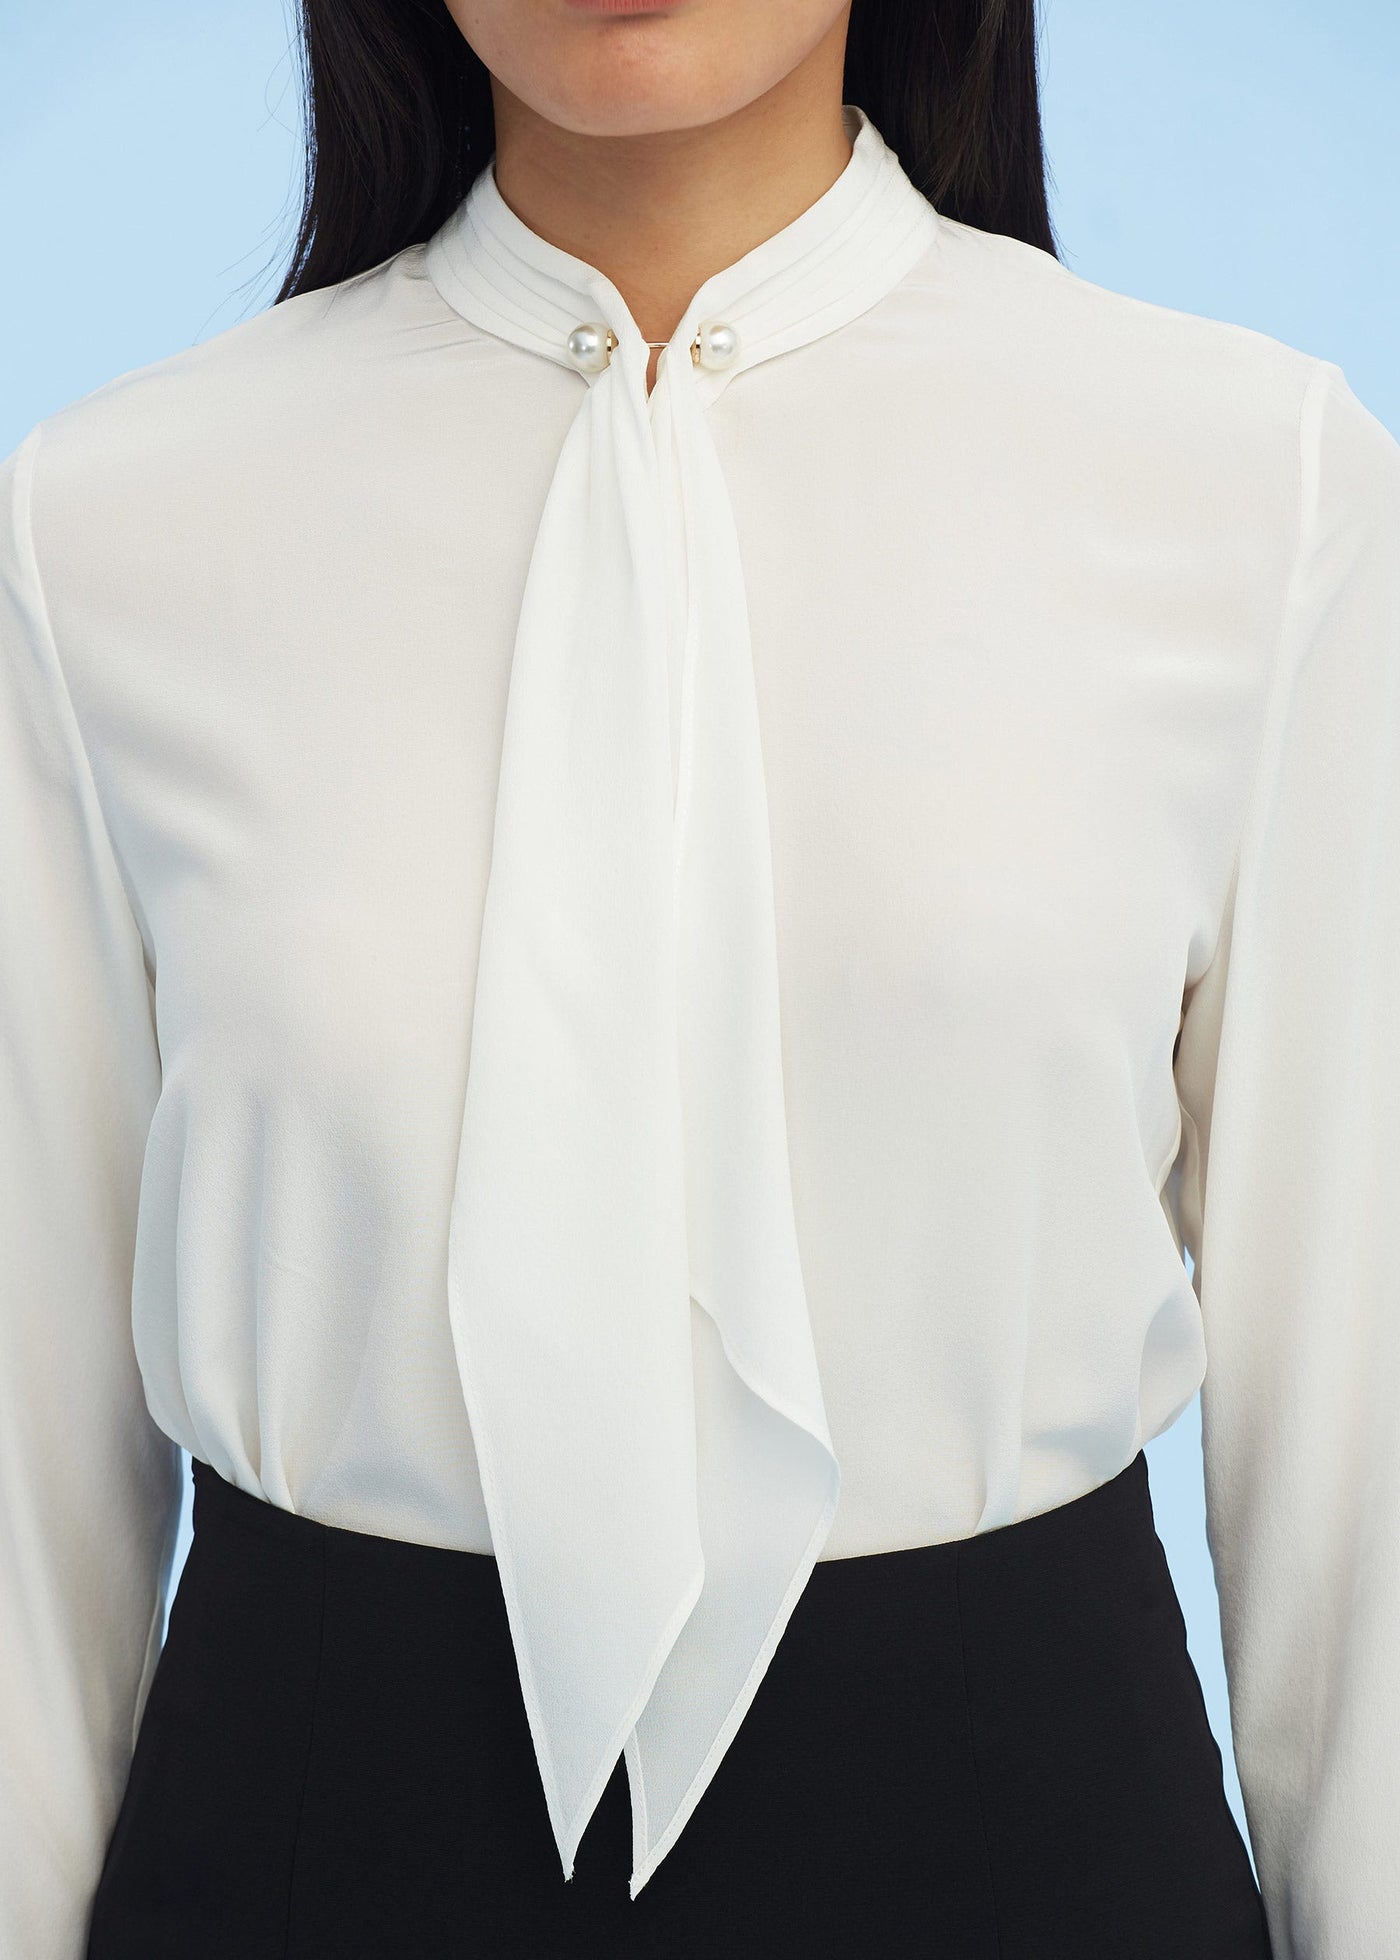 Tie Collar With Pearl Silk Shirt Natural White LILYSILK Factory